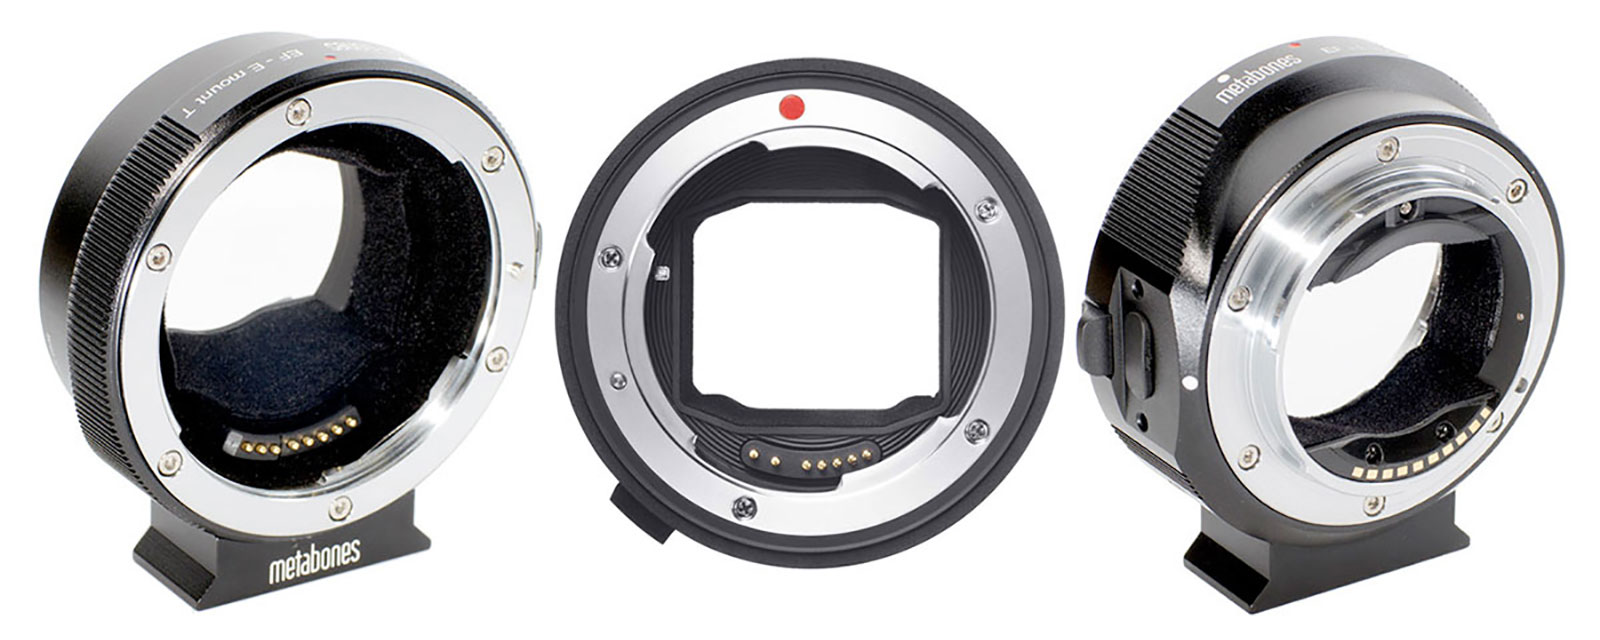 Yoidesu MD-LM Lens Mount Adapter,Lens Mount Adapter for Techart LM-EA7,Lens Adapter for Minolta Mount Lens to Leica M Mount Cameras